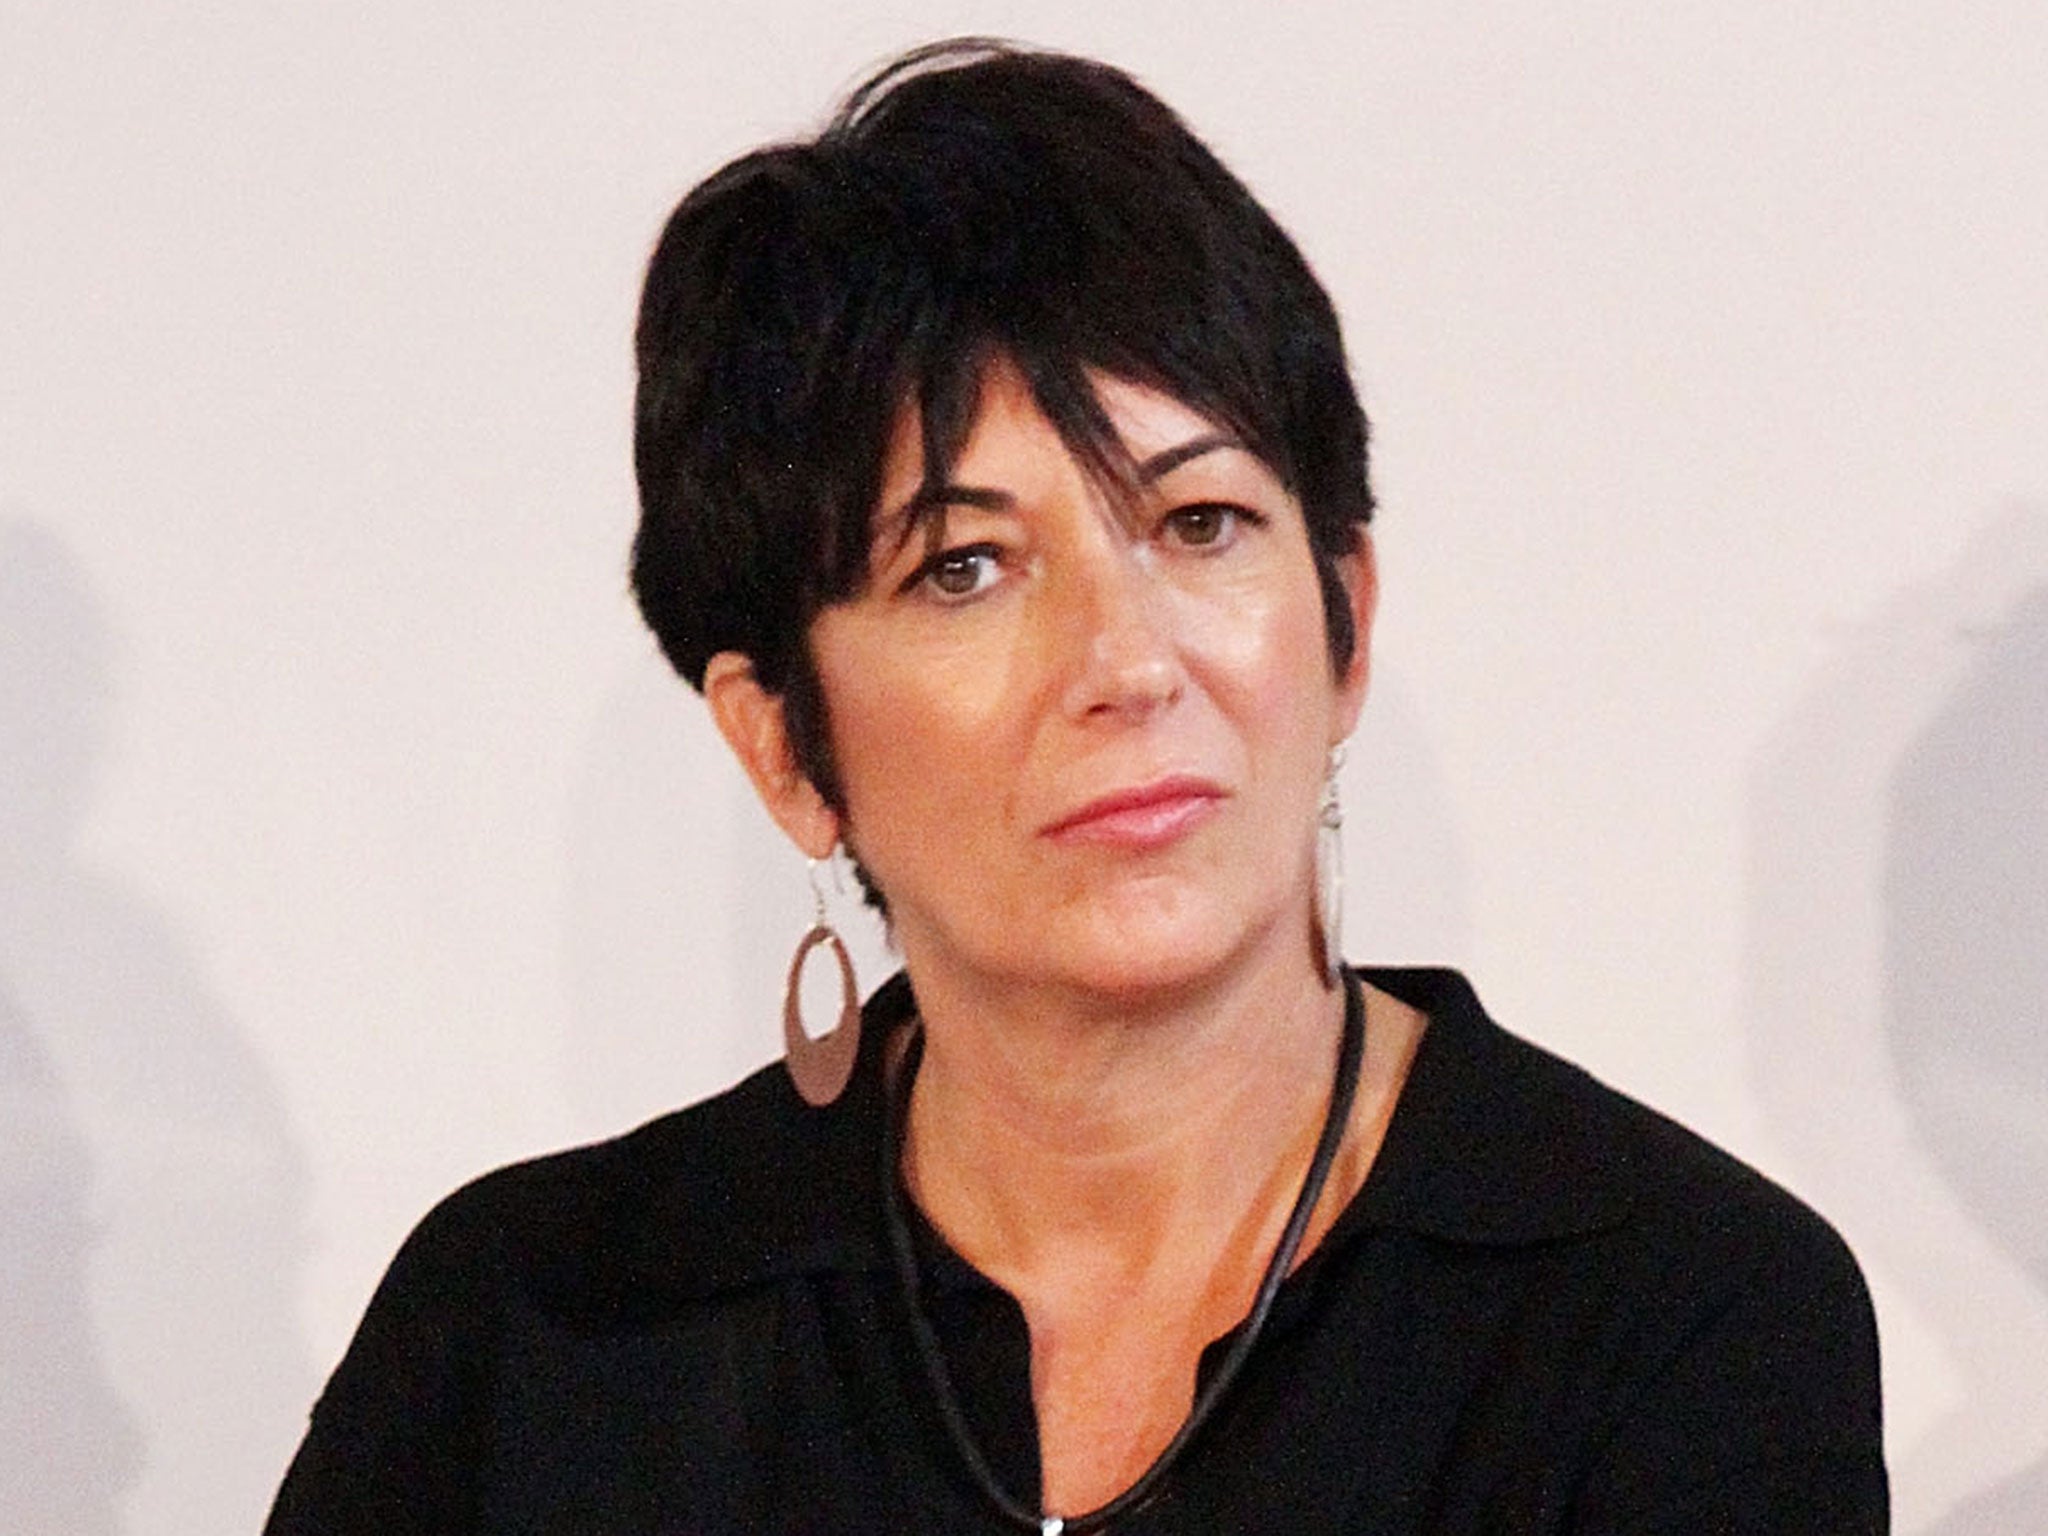 Ghislaine Maxwell's deposition was made in a prior defamation case